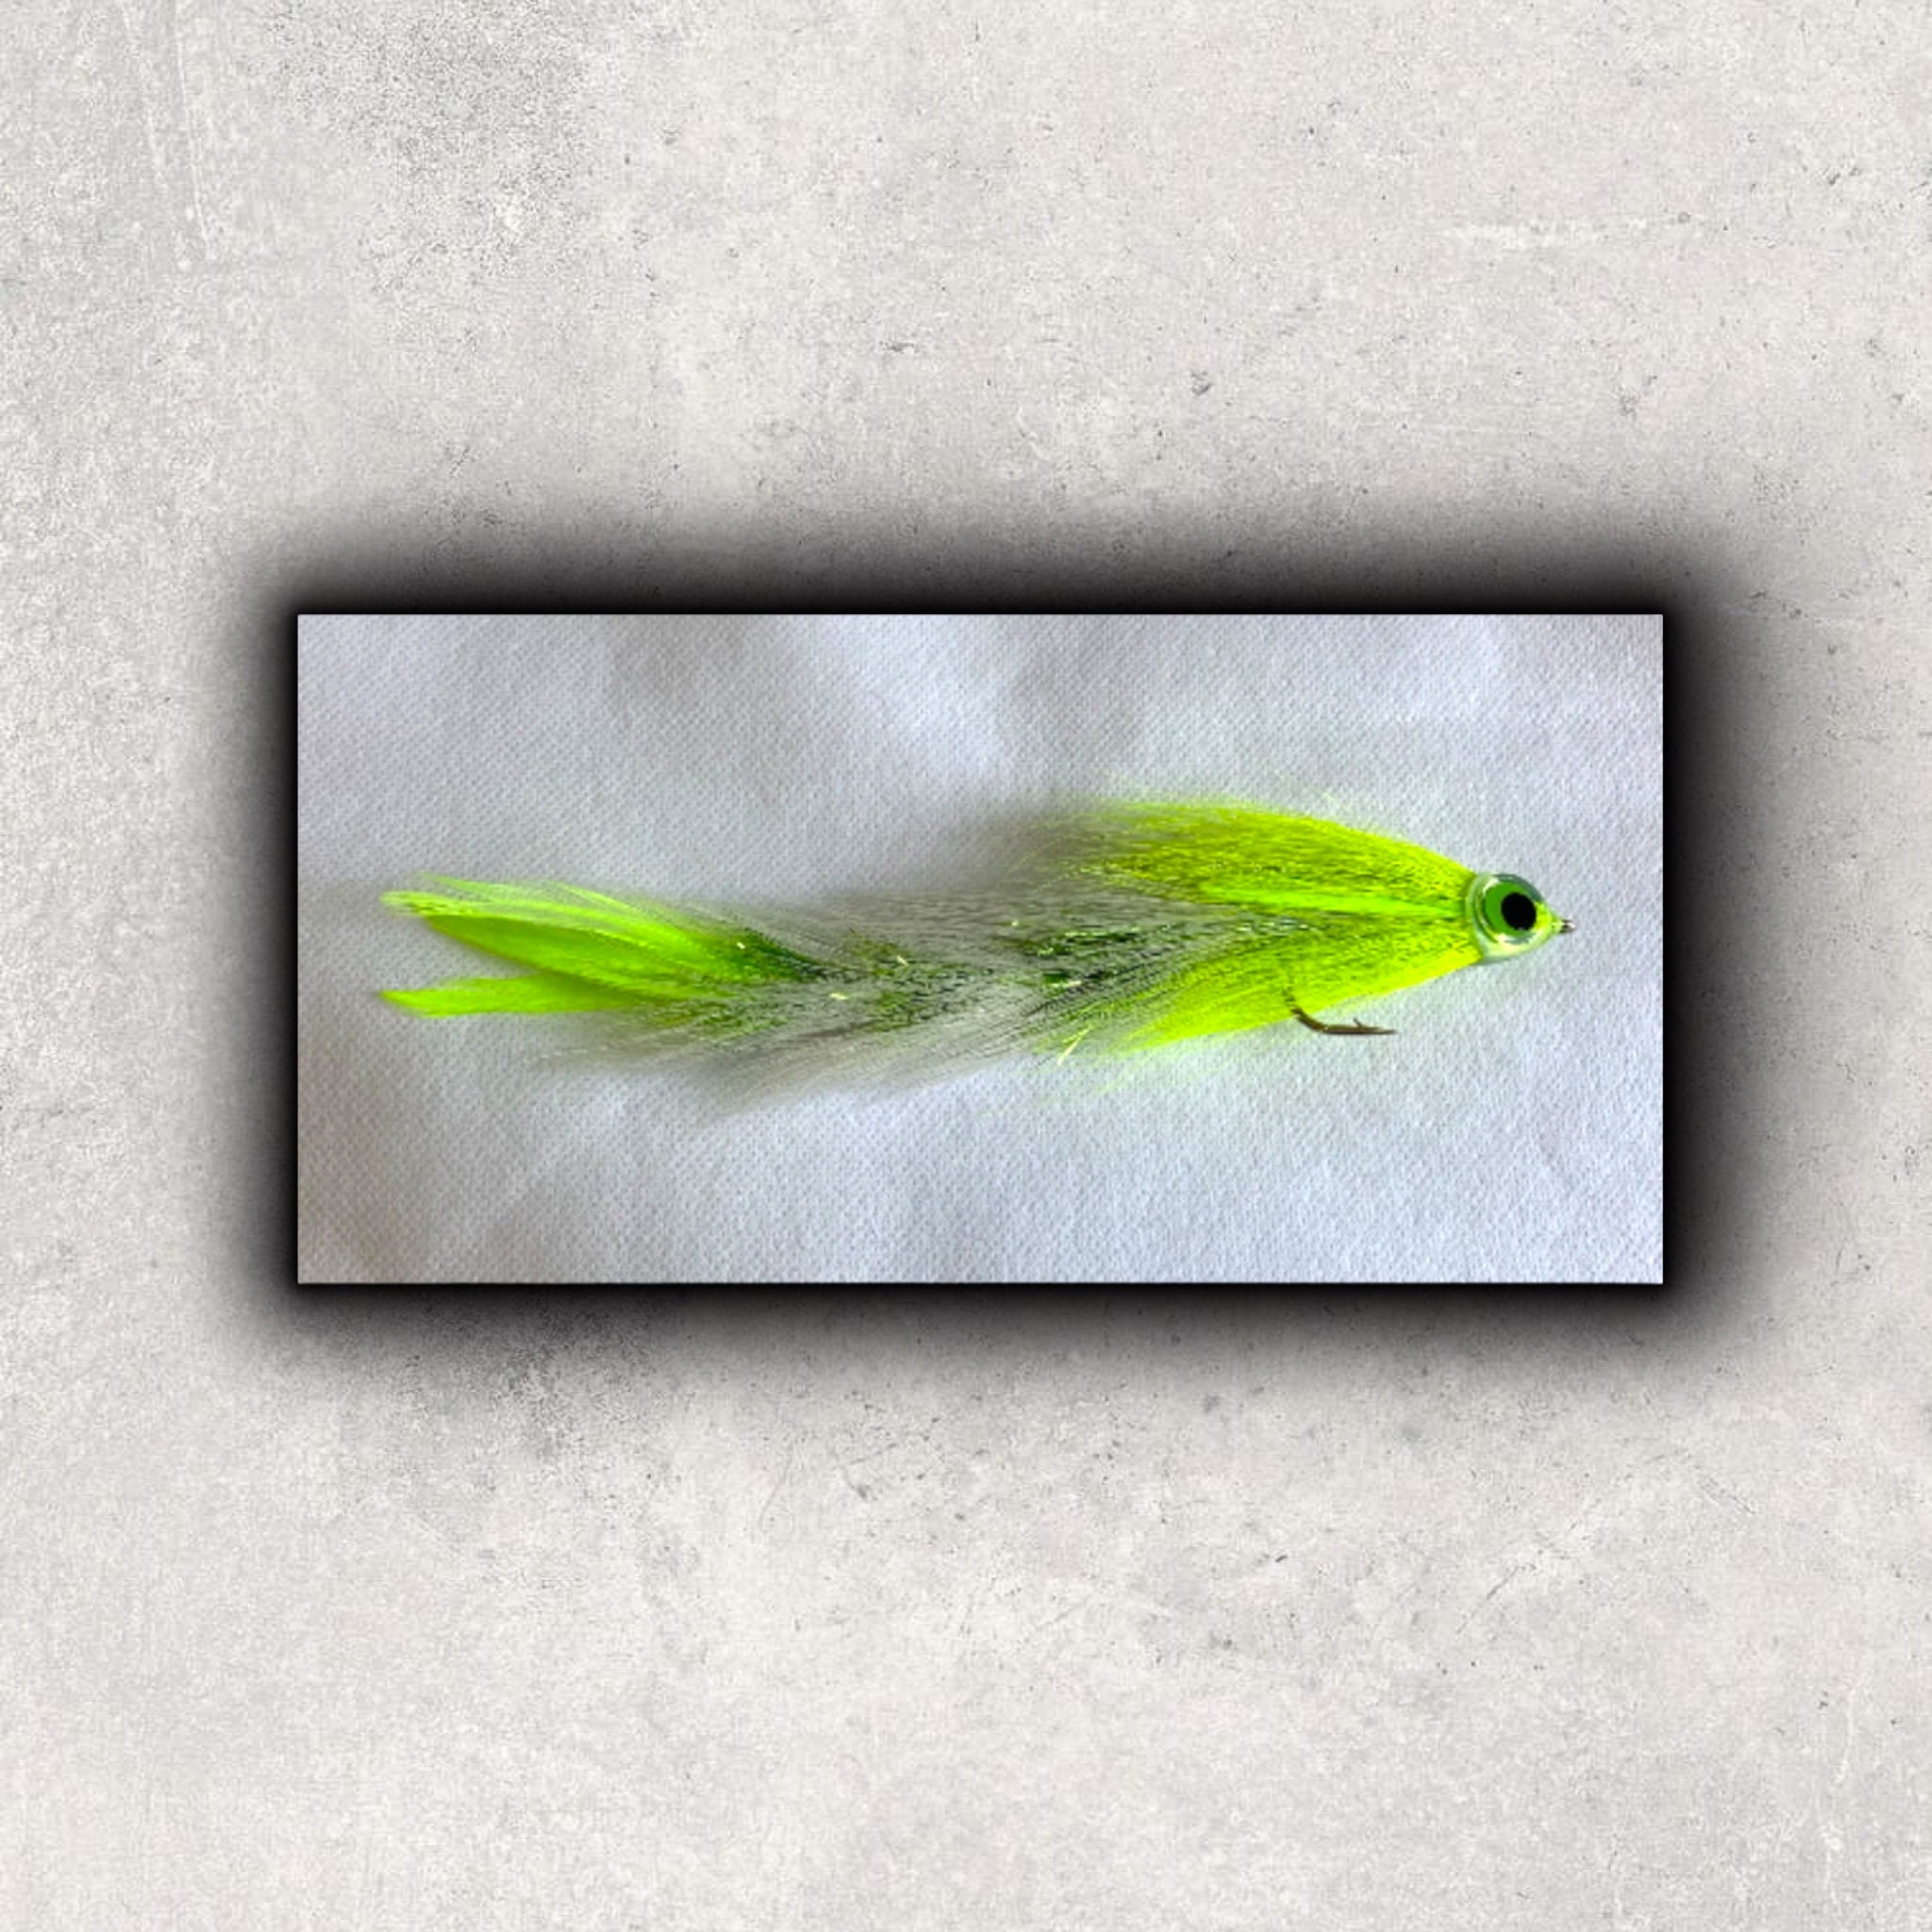 Jointed Fishing Lure Fly Fishing Chartreuse and White Big Game Changer Fly  Muskie, Pike, Bass, Striper Trolling Streamer 6 to 8 -  Norway